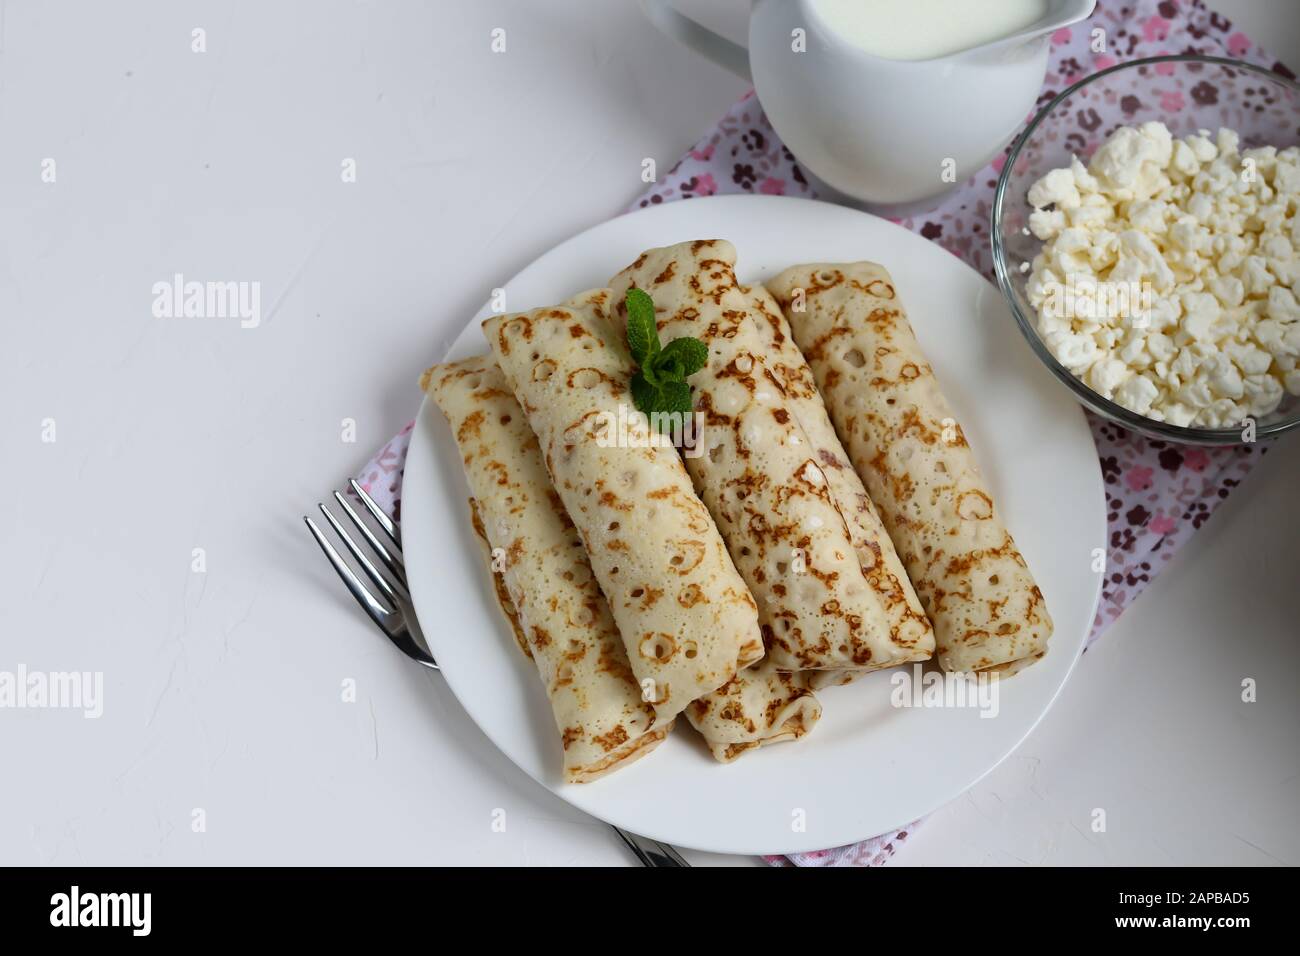 Pancakes With Homemade Cottage Cheese Sour Milk Fermented Product